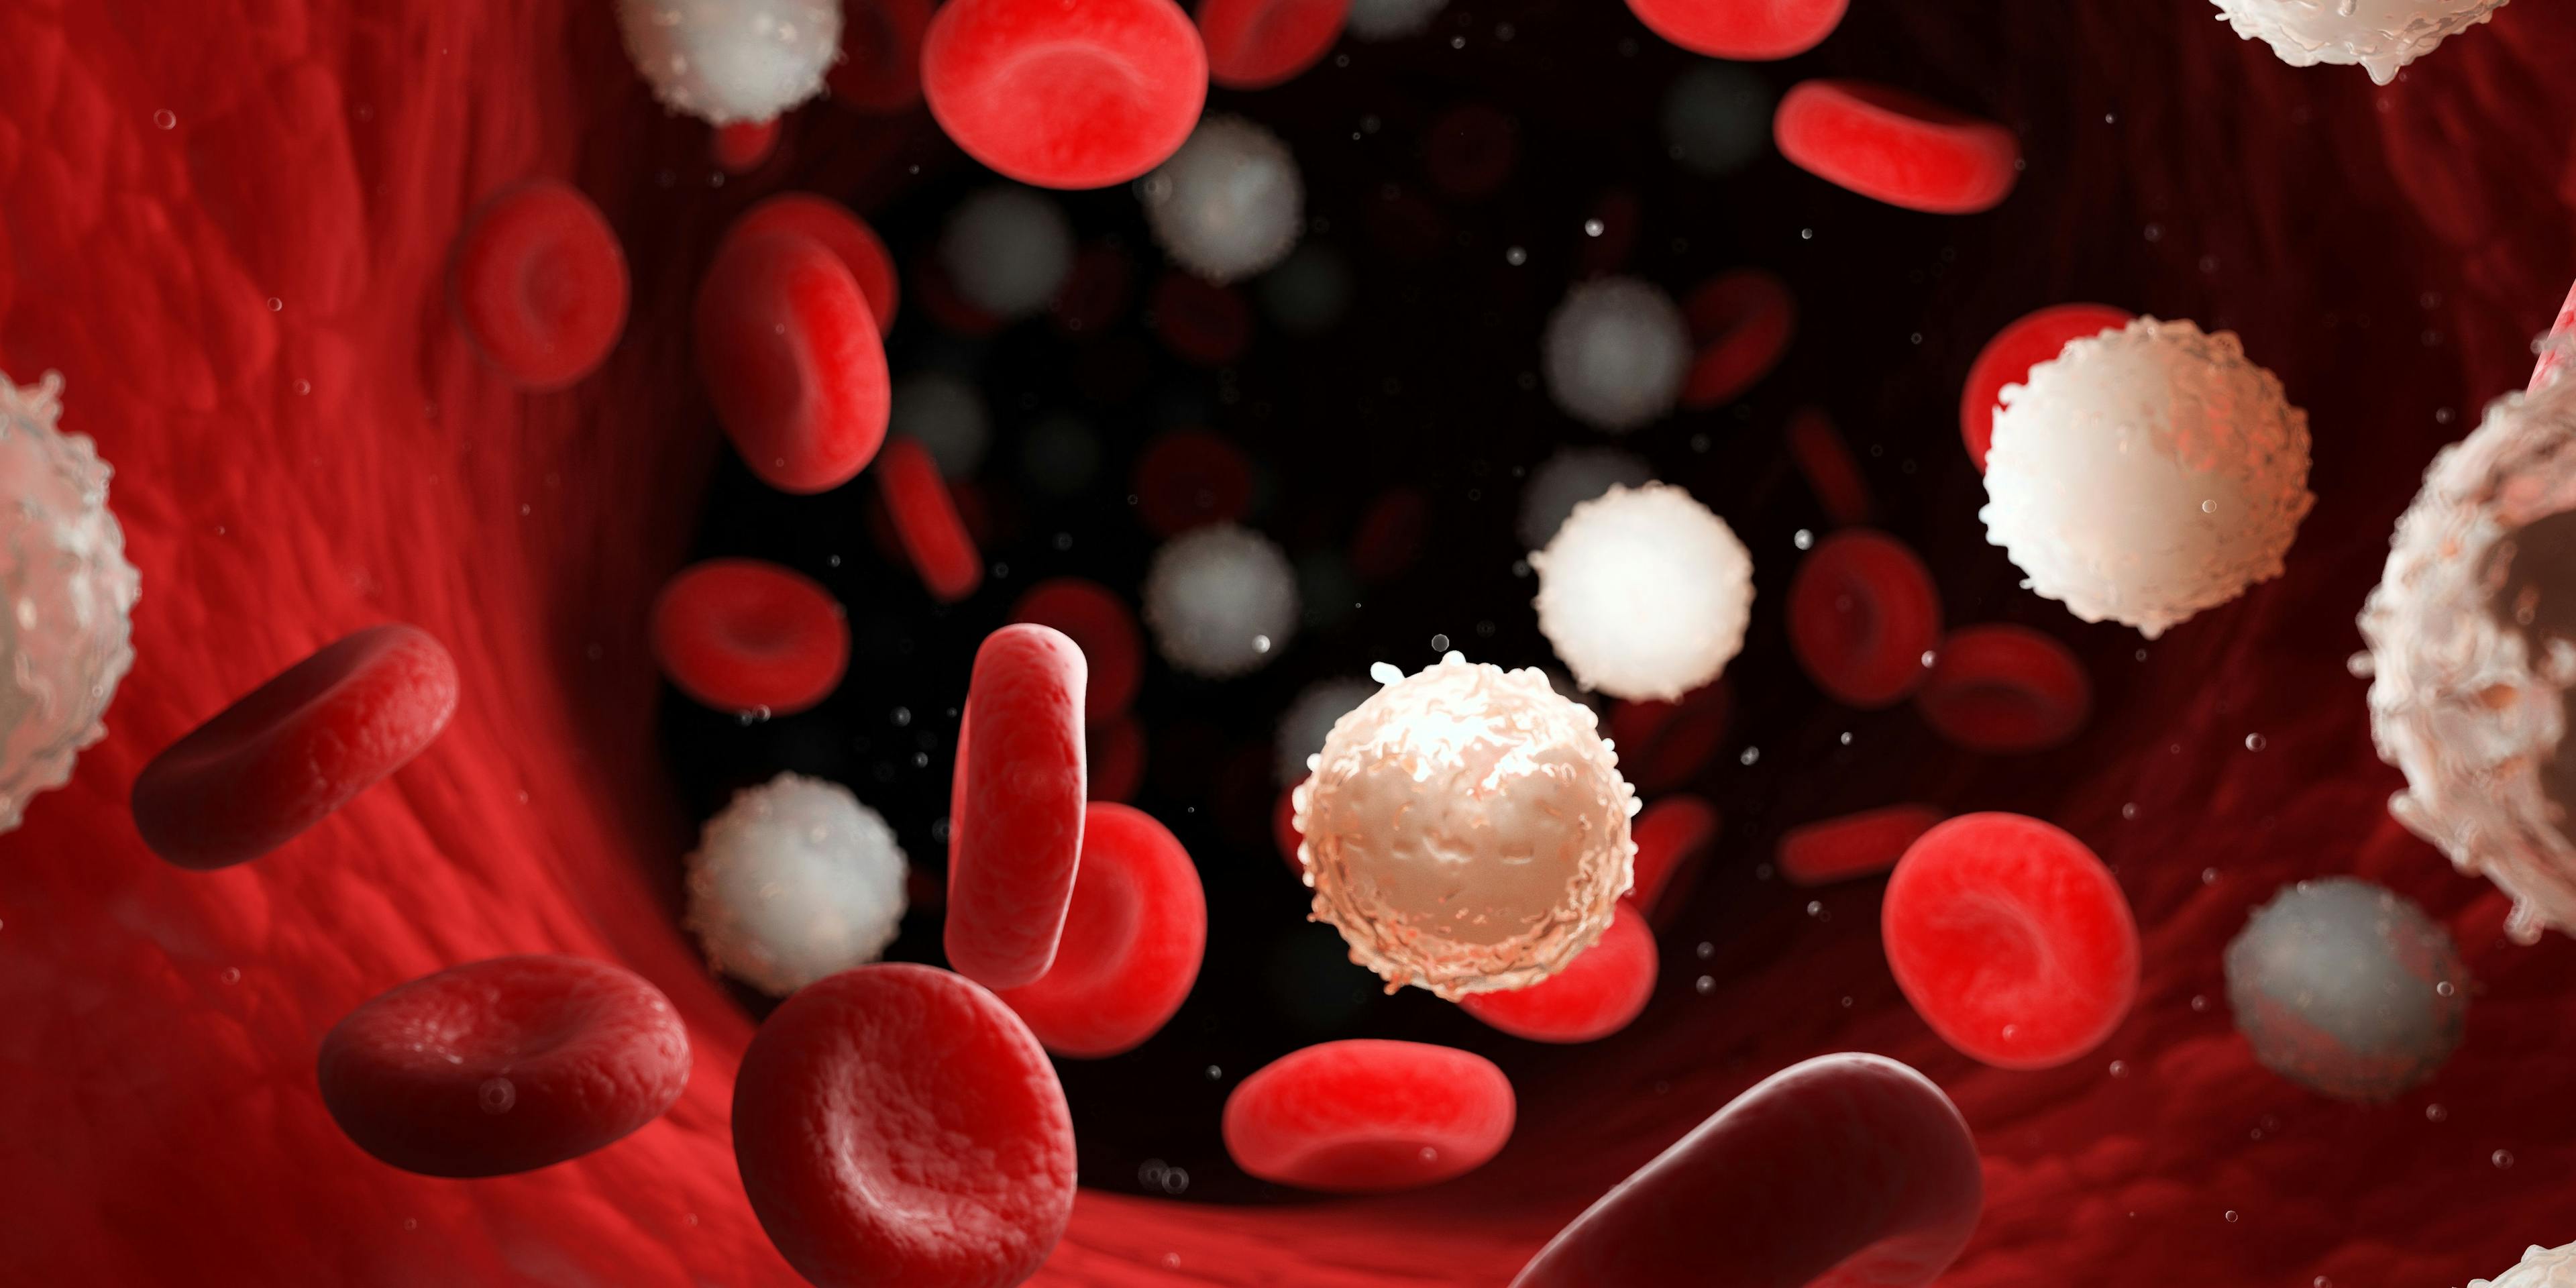 white blood cell | Image Credit: SciePro - stock.adobe.com